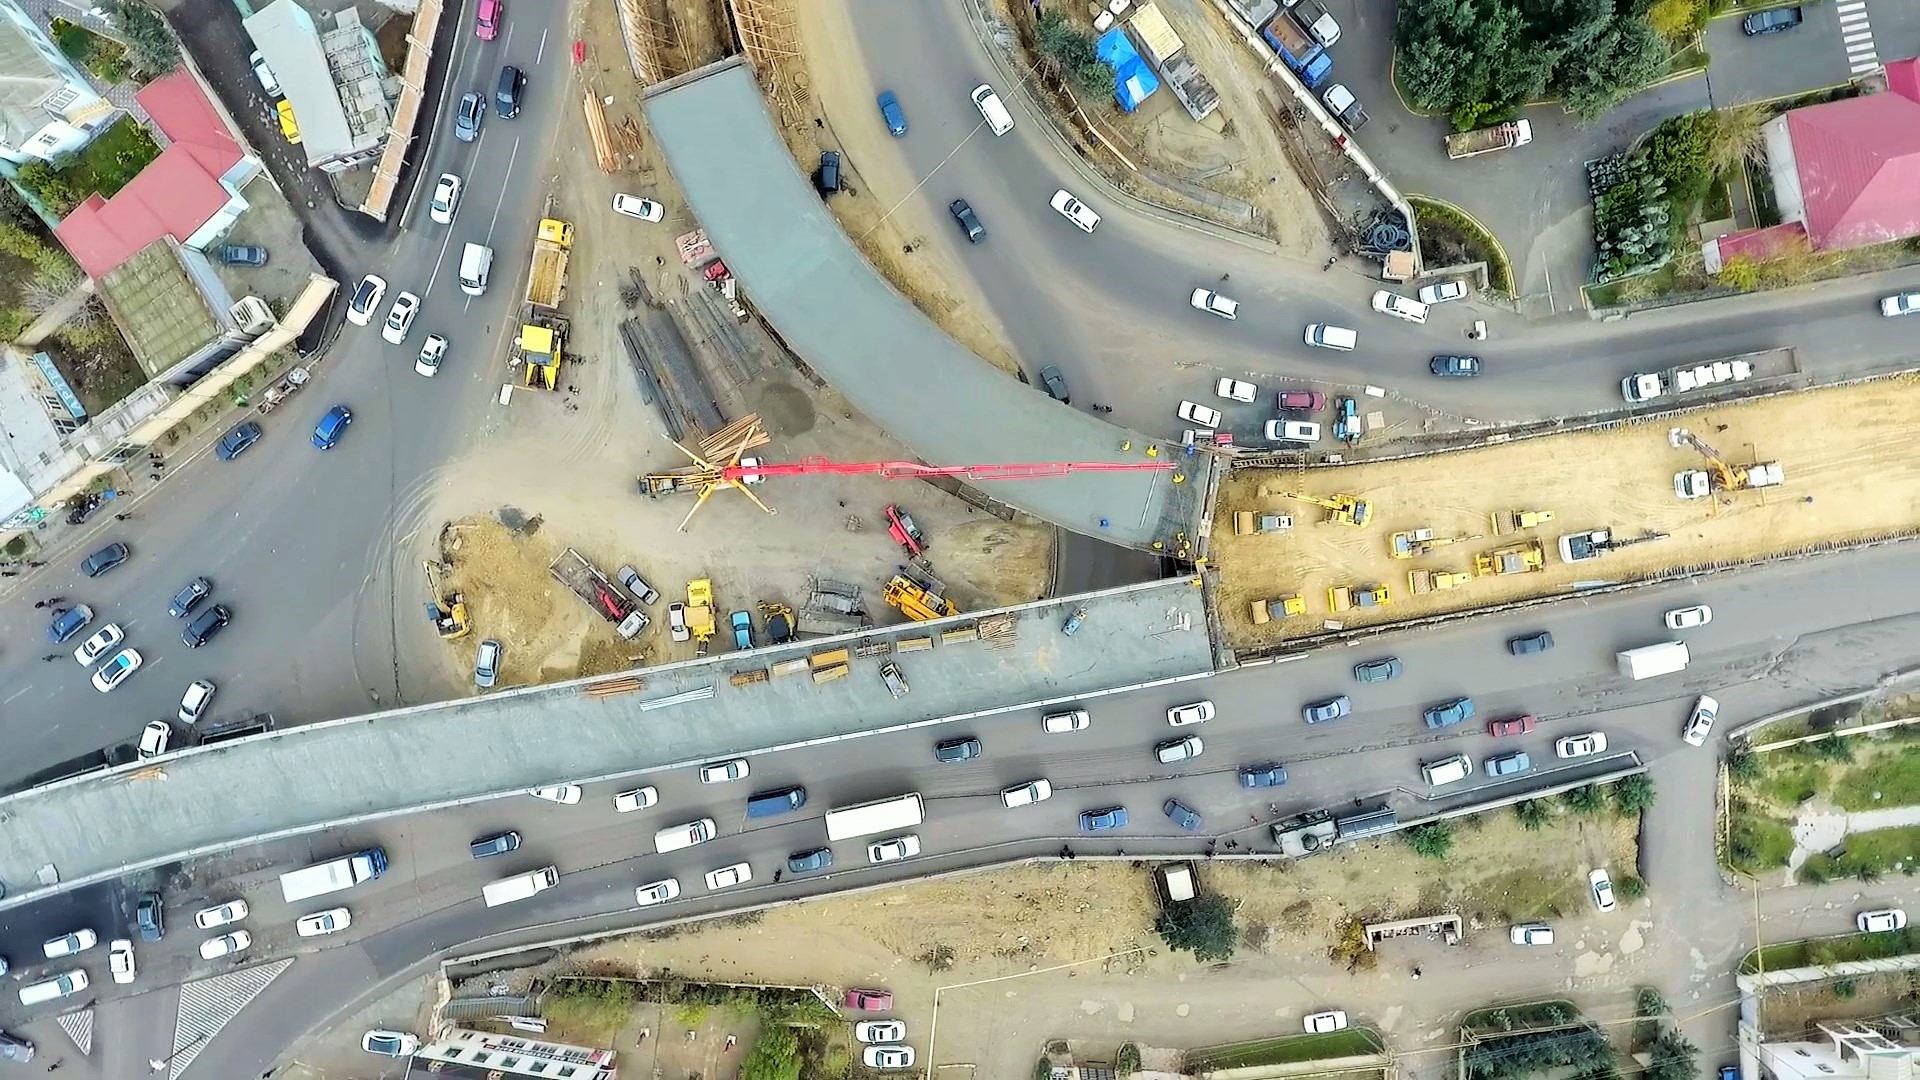 Construction work of new road junction in entrance-exit of Baku nearing completion (PHOTO/VIDEO)